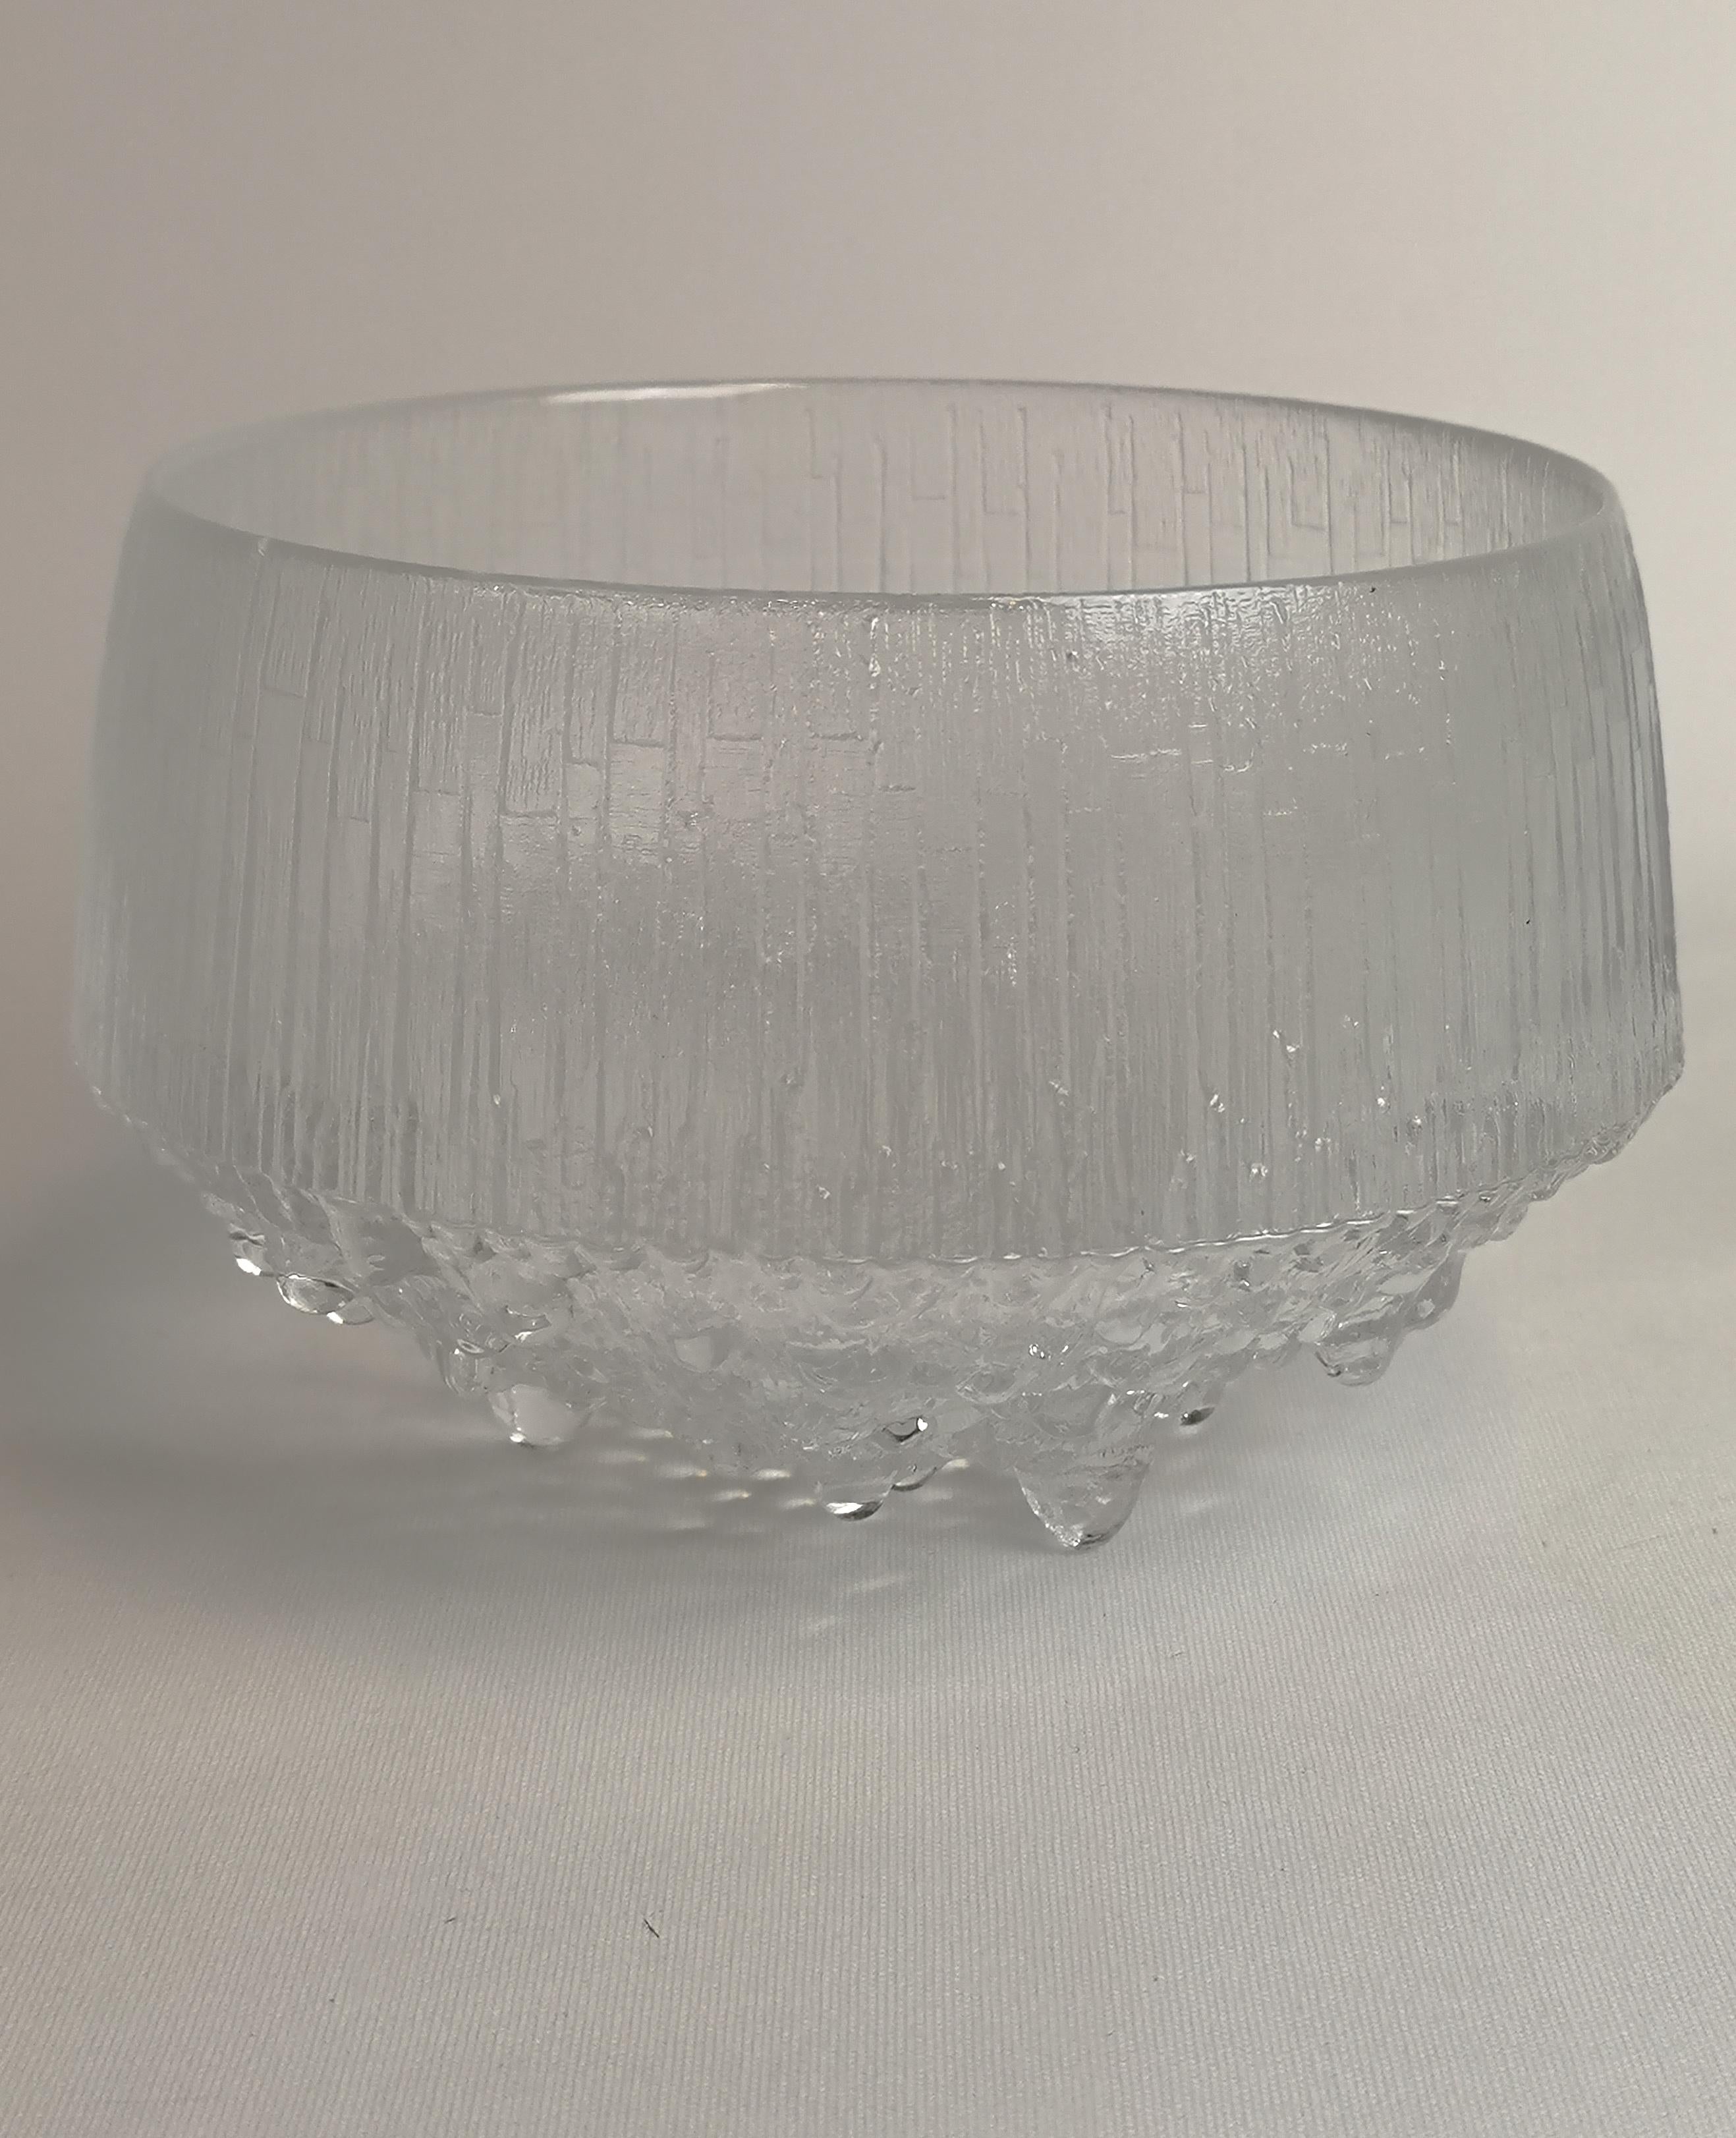 Mid-20th Century Set of Iittala Ultima Thule Bowls 13 Pieces For Sale